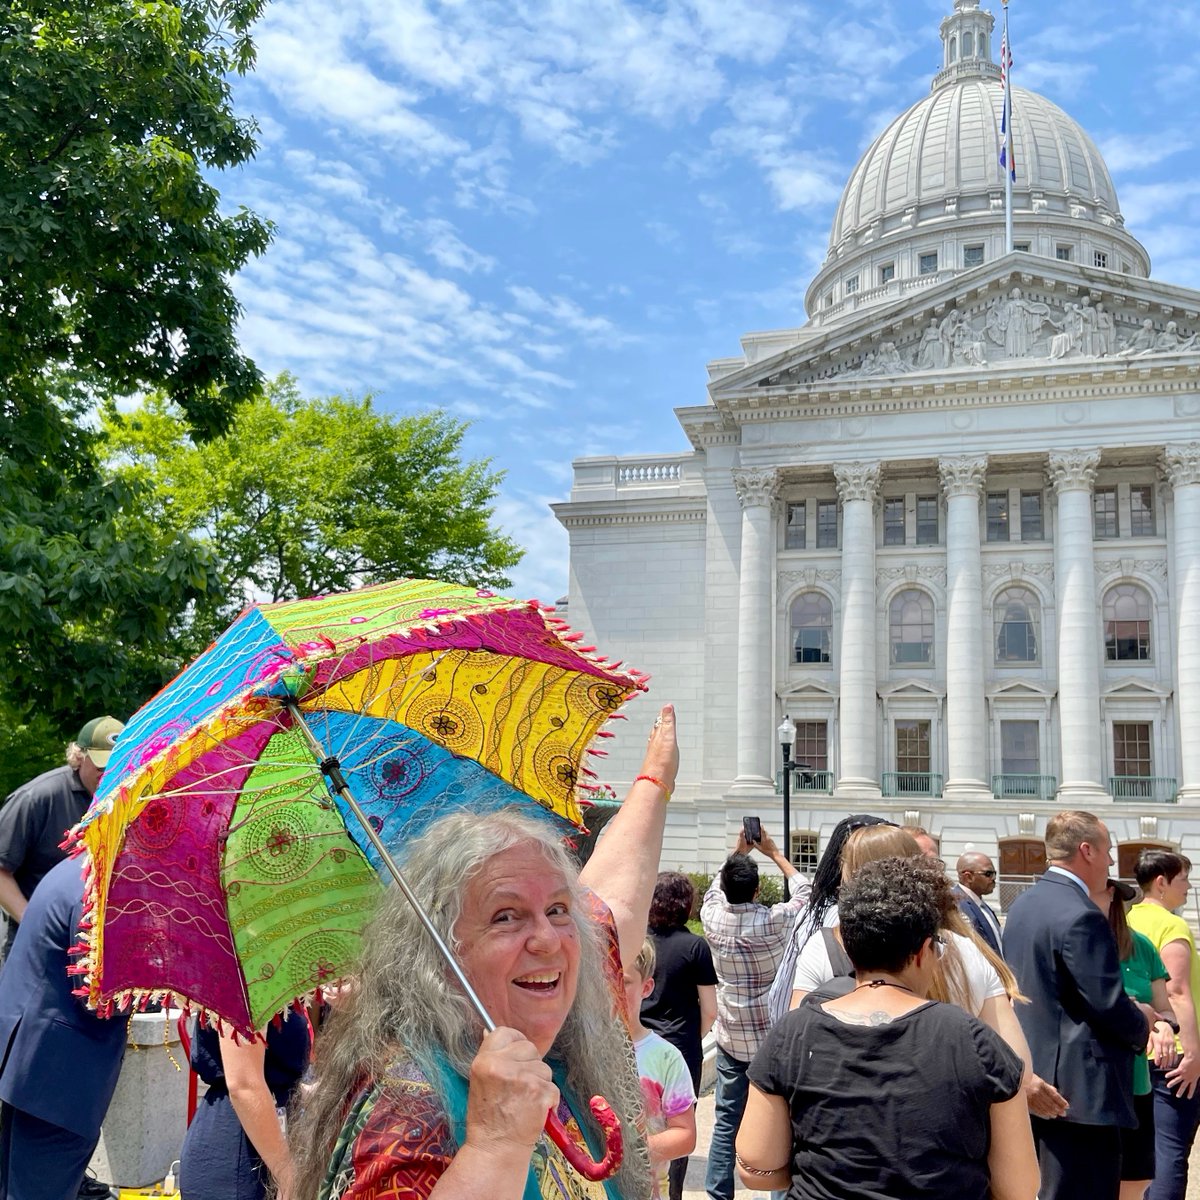 June is #LGBTQPrideMonth! I was among the many joining with Wisconsin Governor Tony Evers in #LGBTQ Support at the #PrideFlag raising over the Wisconsin State Capitol on June 1 & among those pictured in this news report: captimes.com/news/pride-fla…